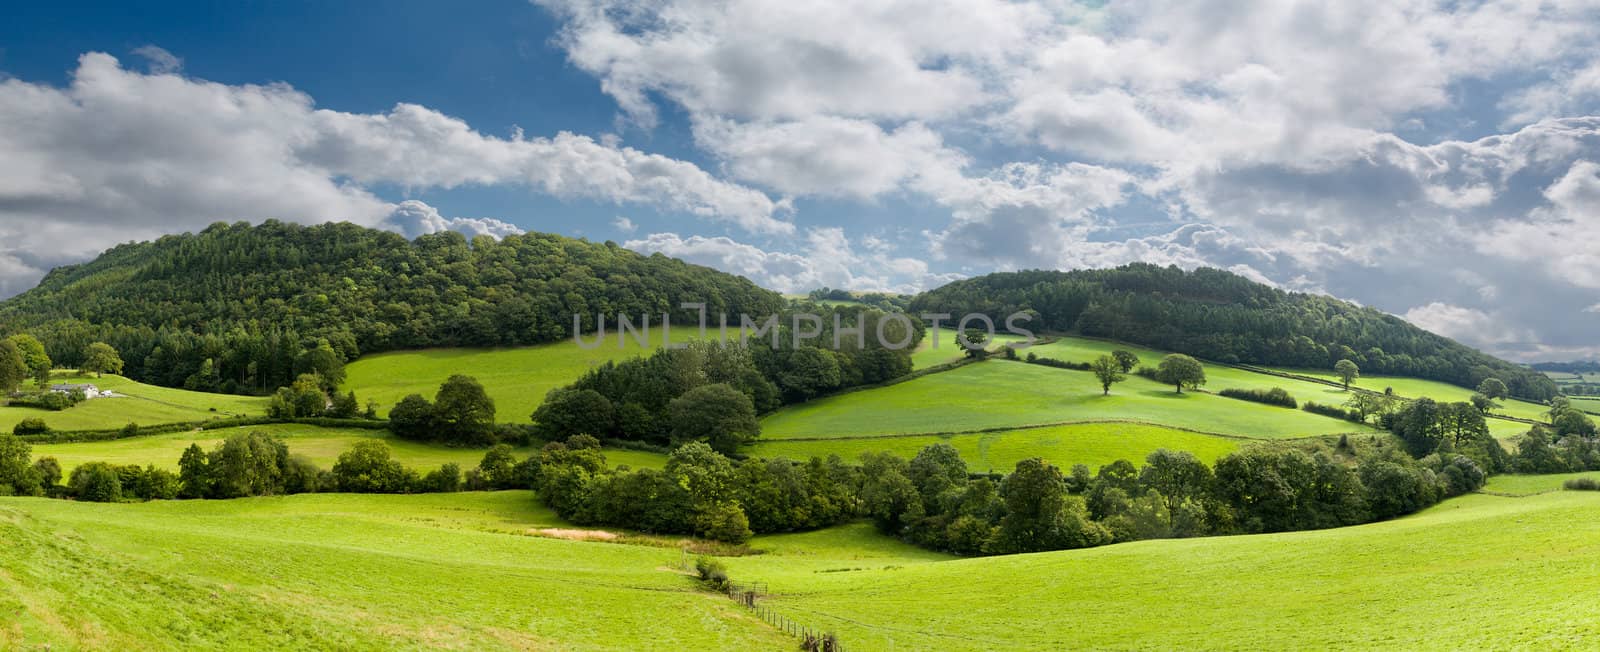 Panorama of welsh countryside by steheap